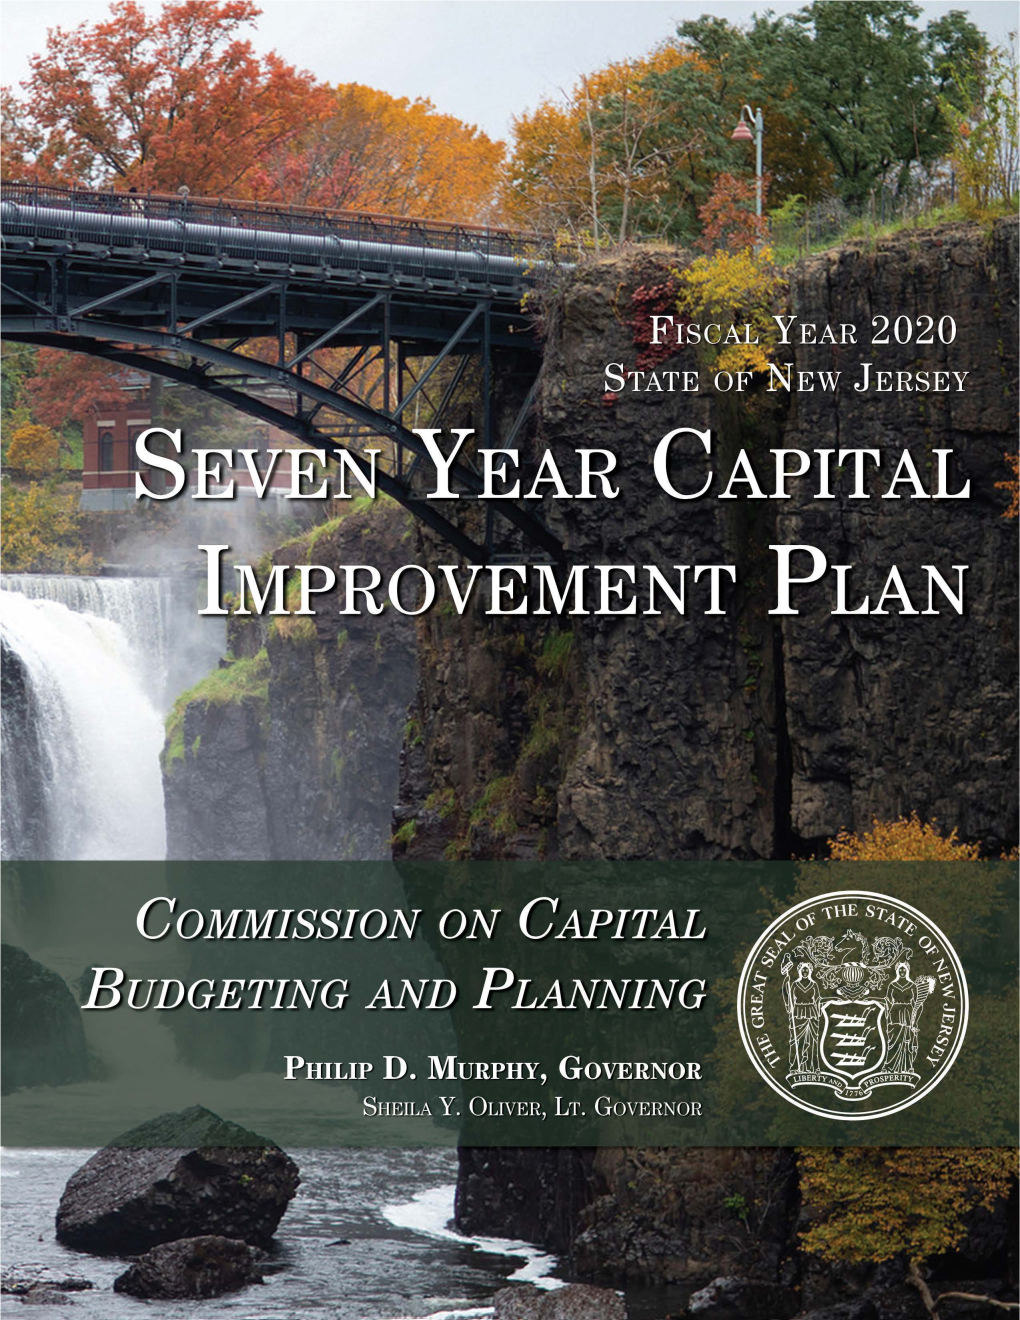 Section Iii-A Departmental Seven-Year Capital